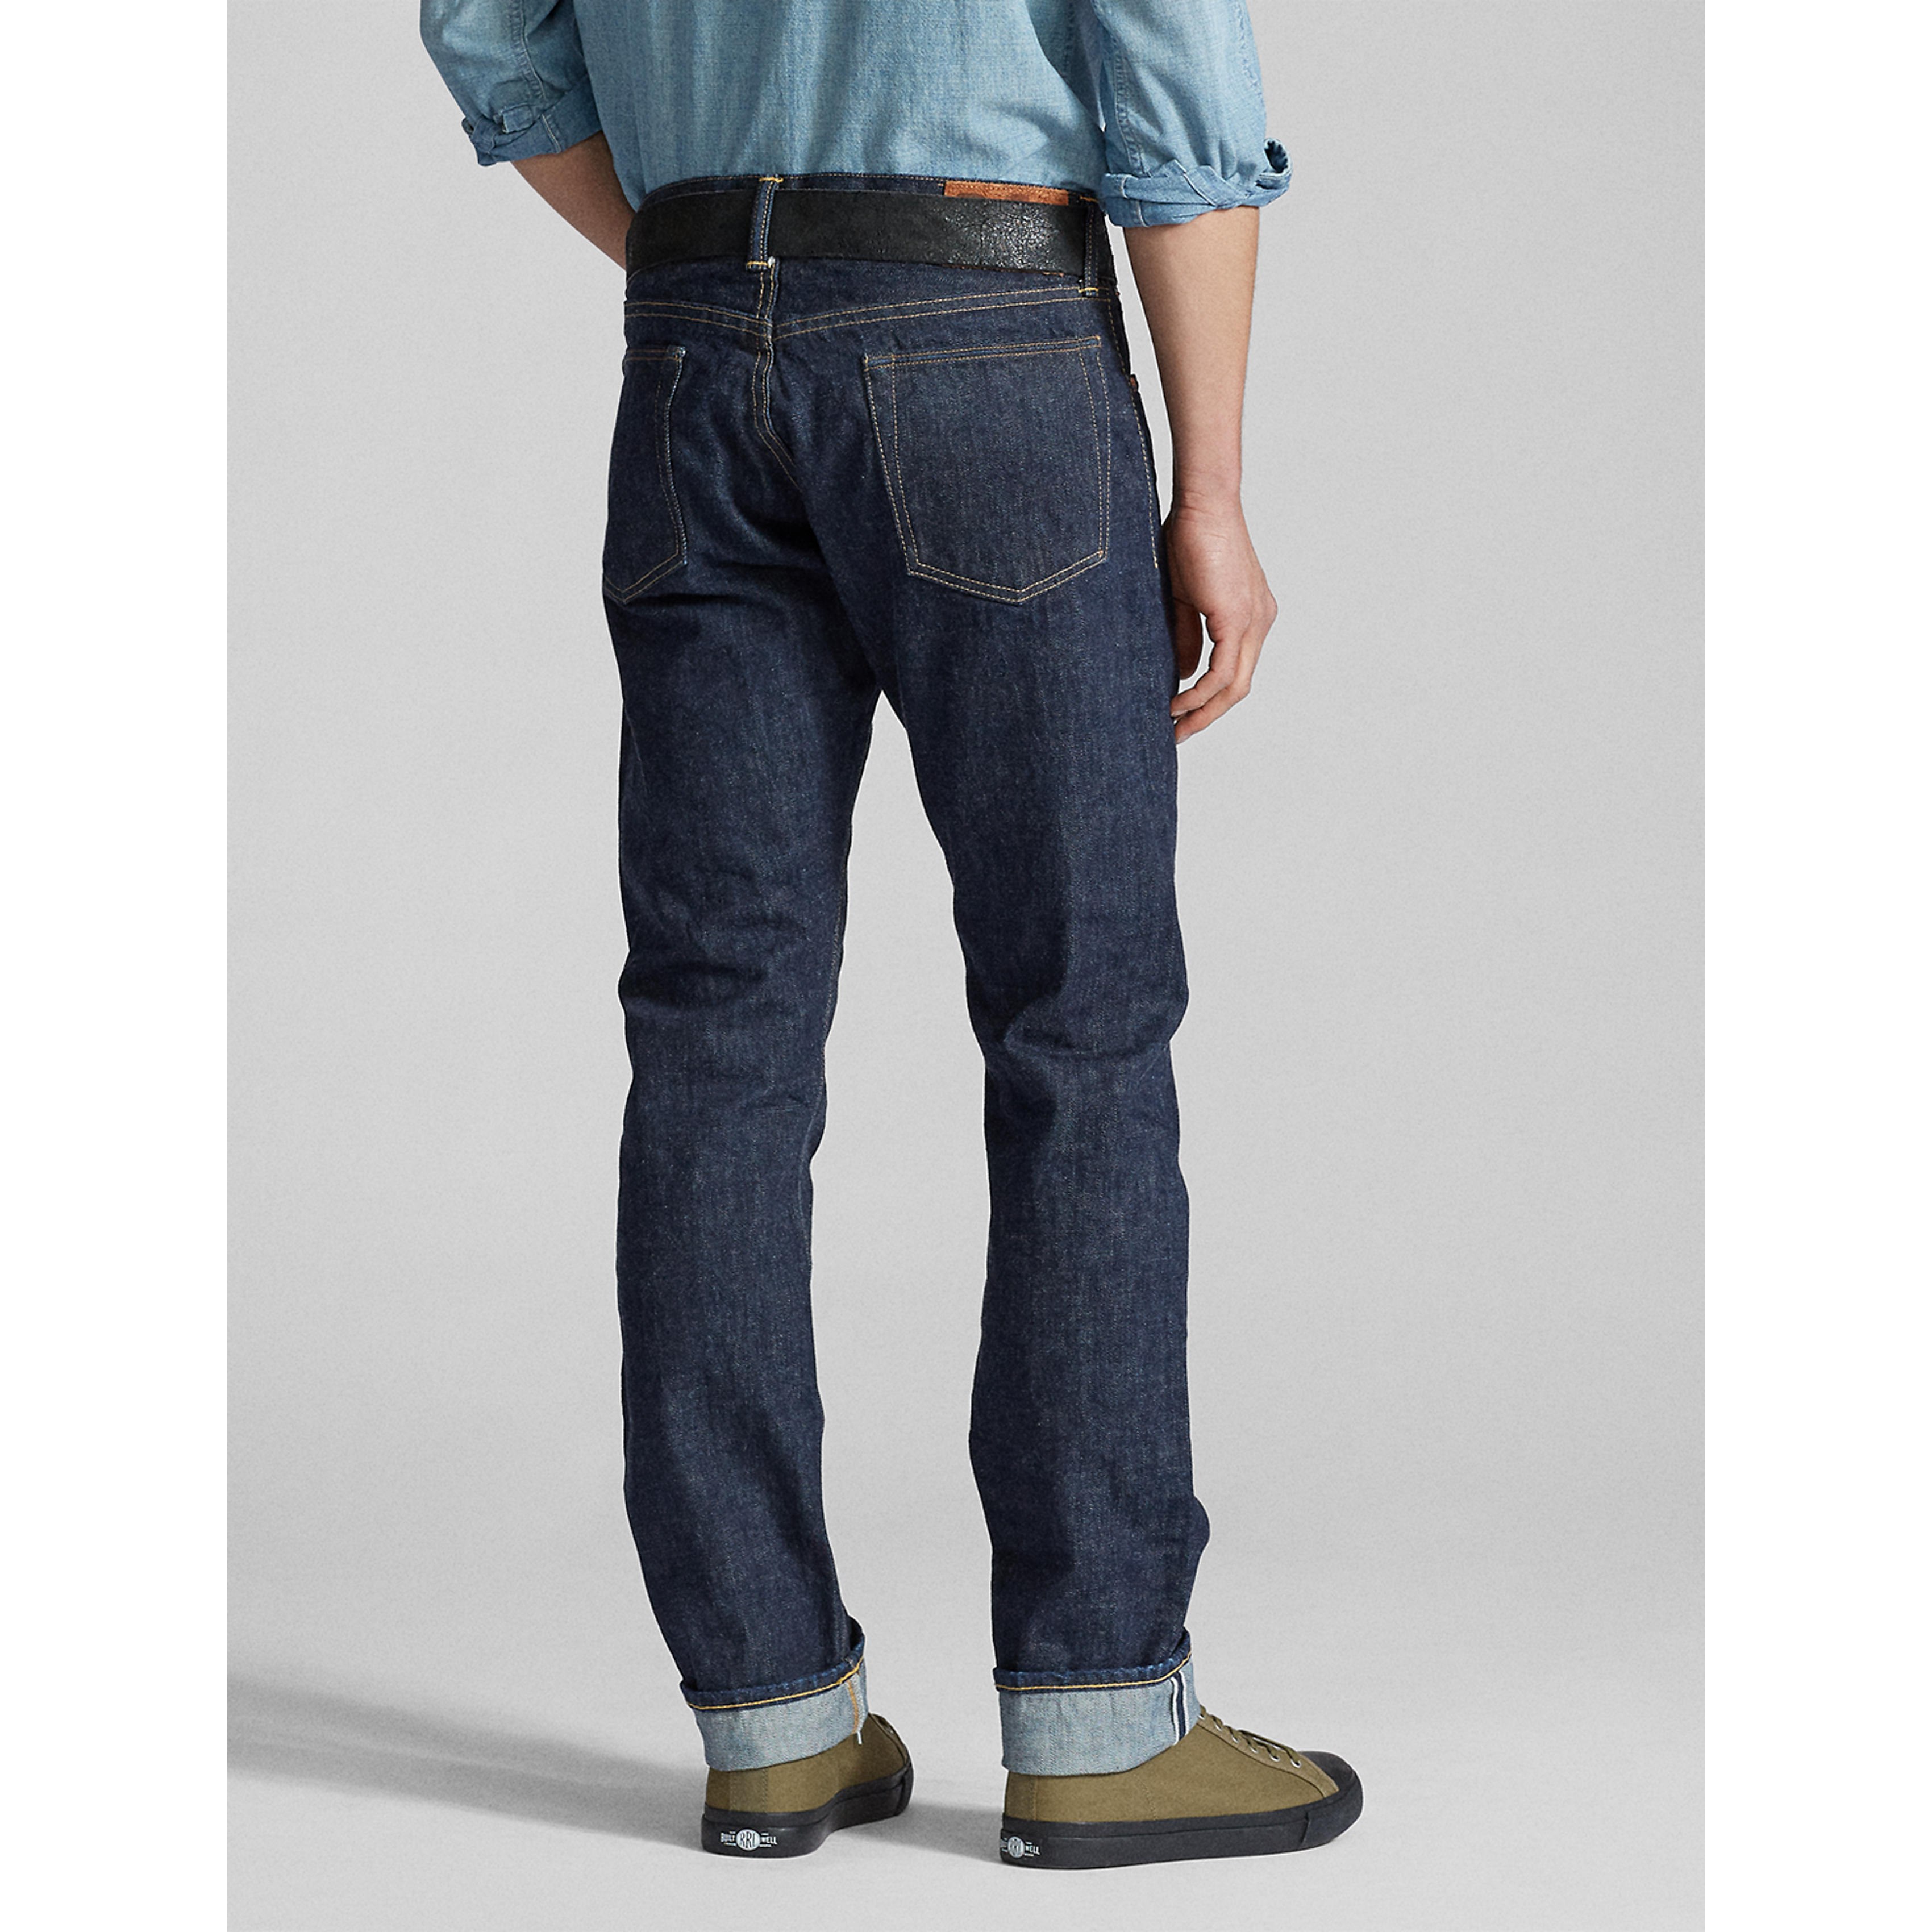 Buy Navy Slim Fit Washed Jeans for Men | Status Quo